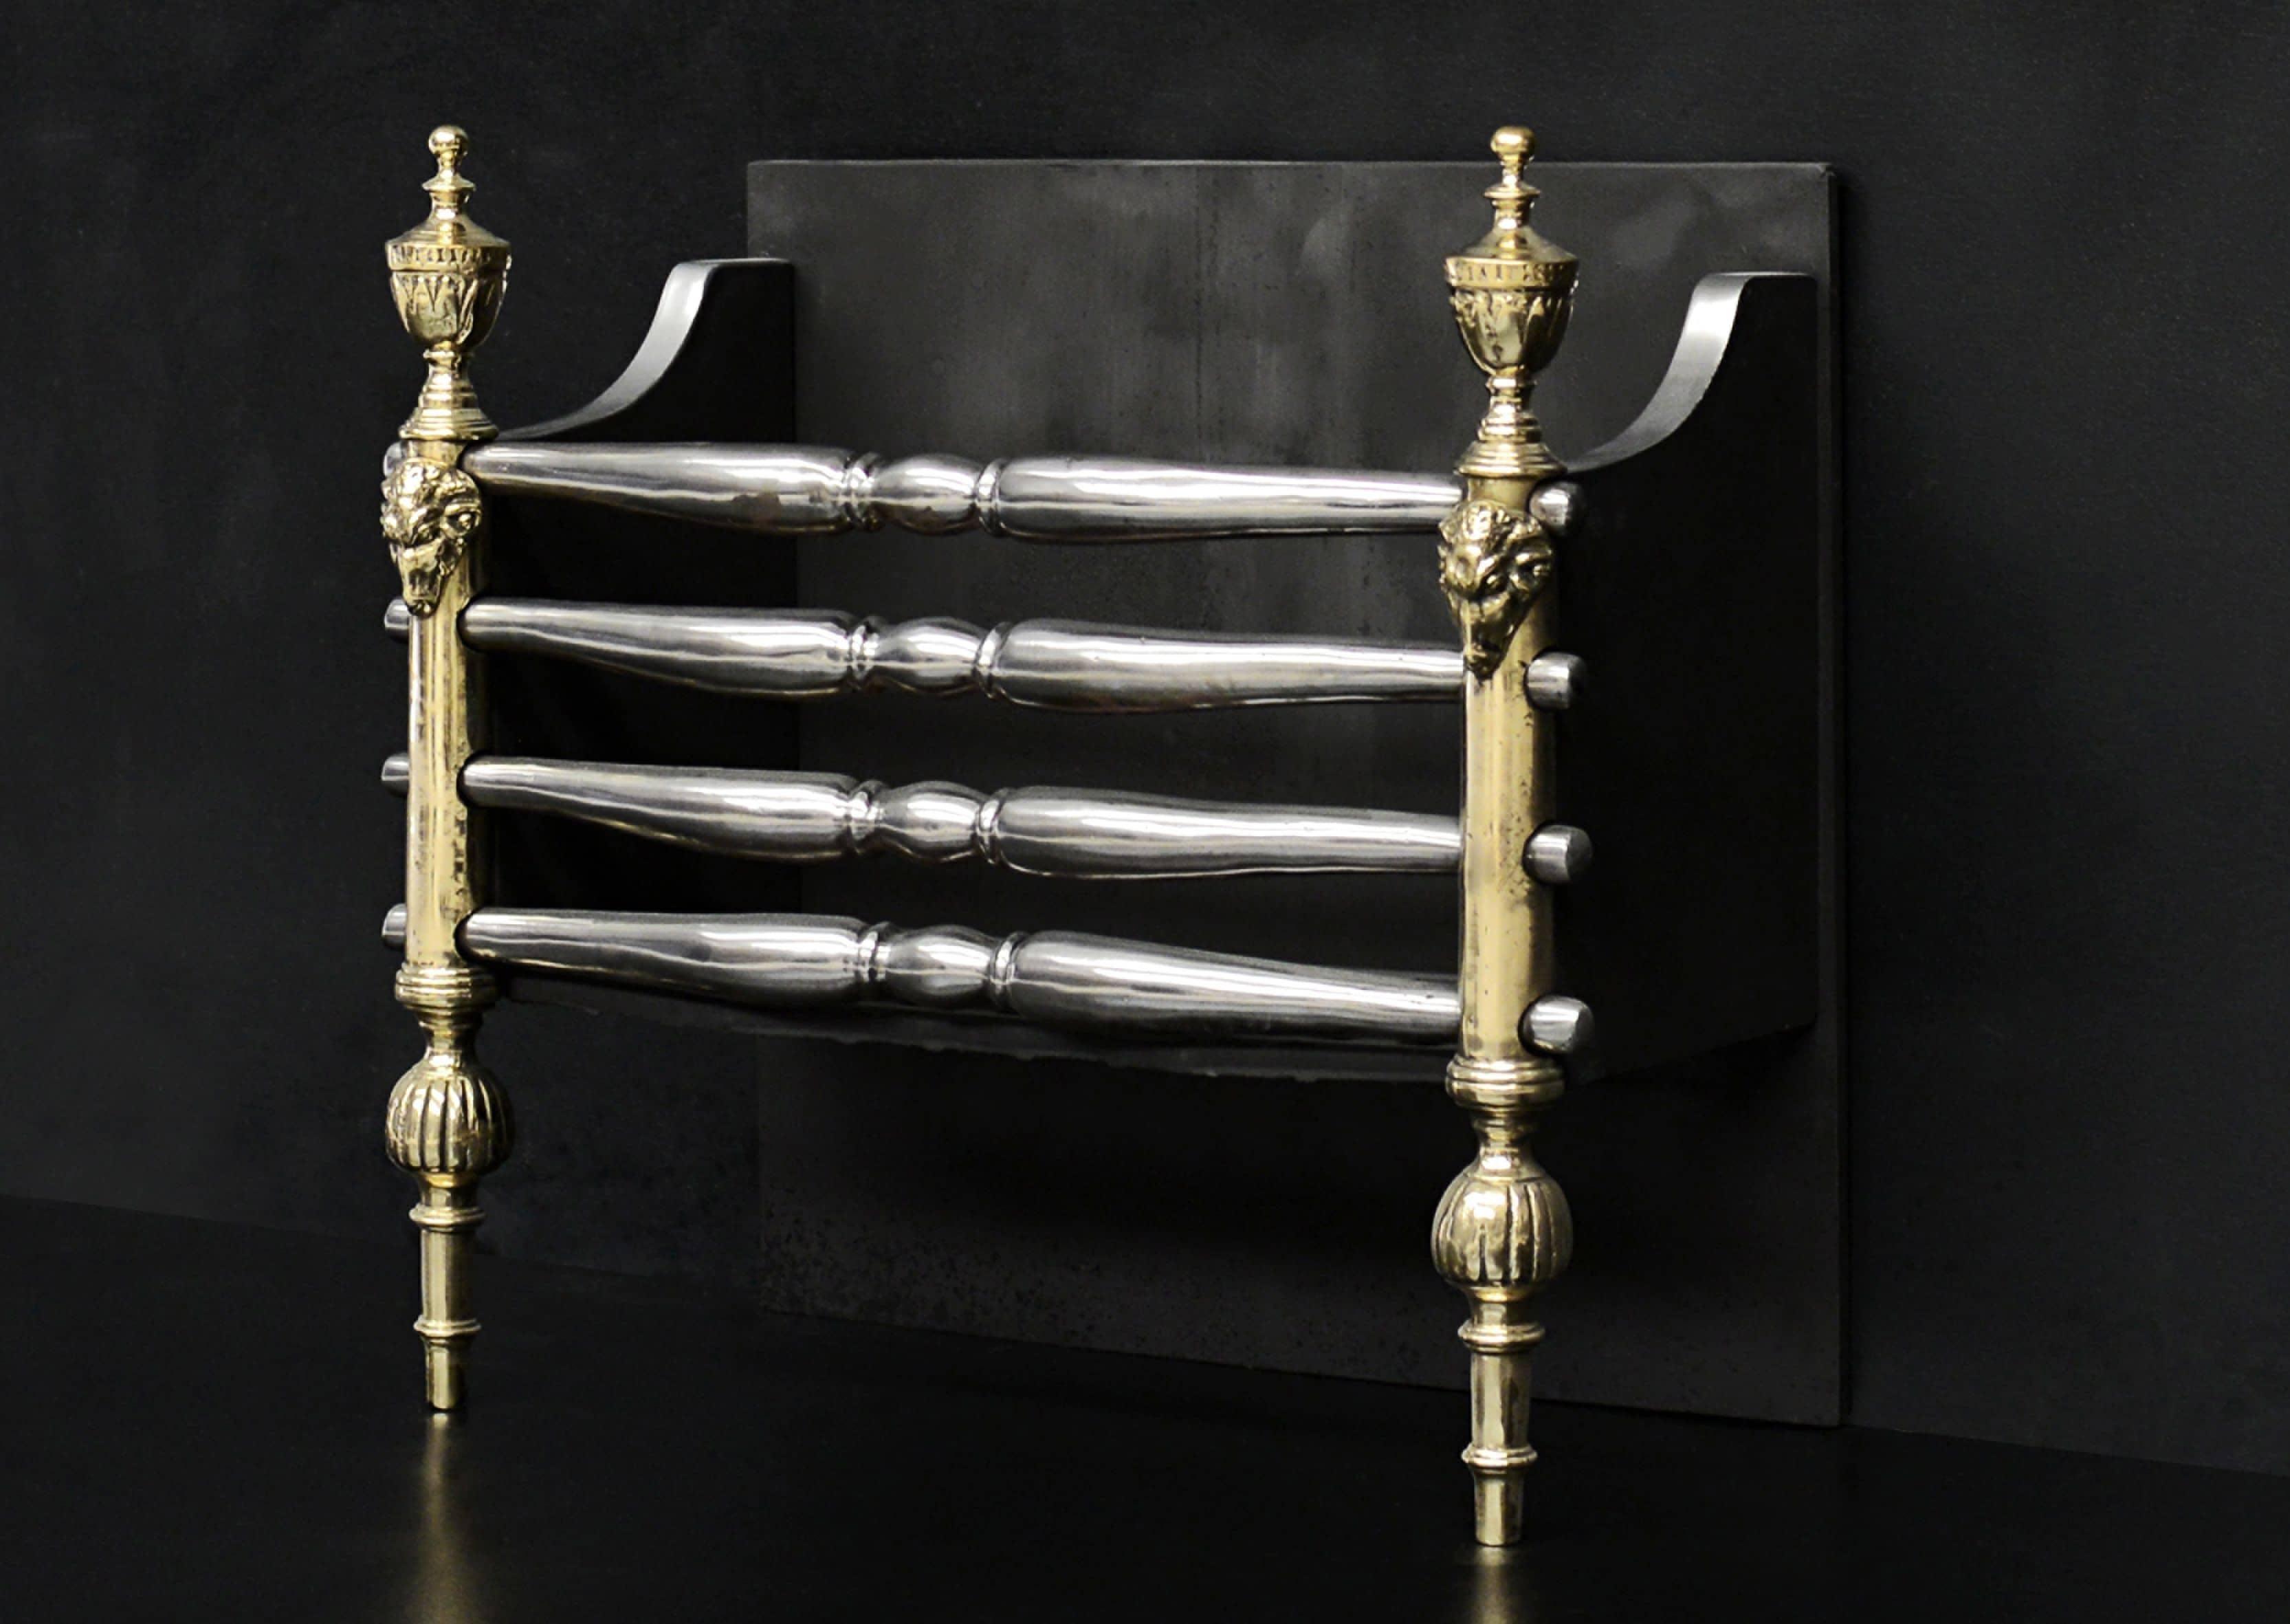 A brass and steel firegrate in the Regency style. The tapering feet surmounted by gadrooning, ram's heads and engraved brass finials. Shaped polished steel front bars with plain fireback behind. English, 19th century. 

Measures: Width at front: